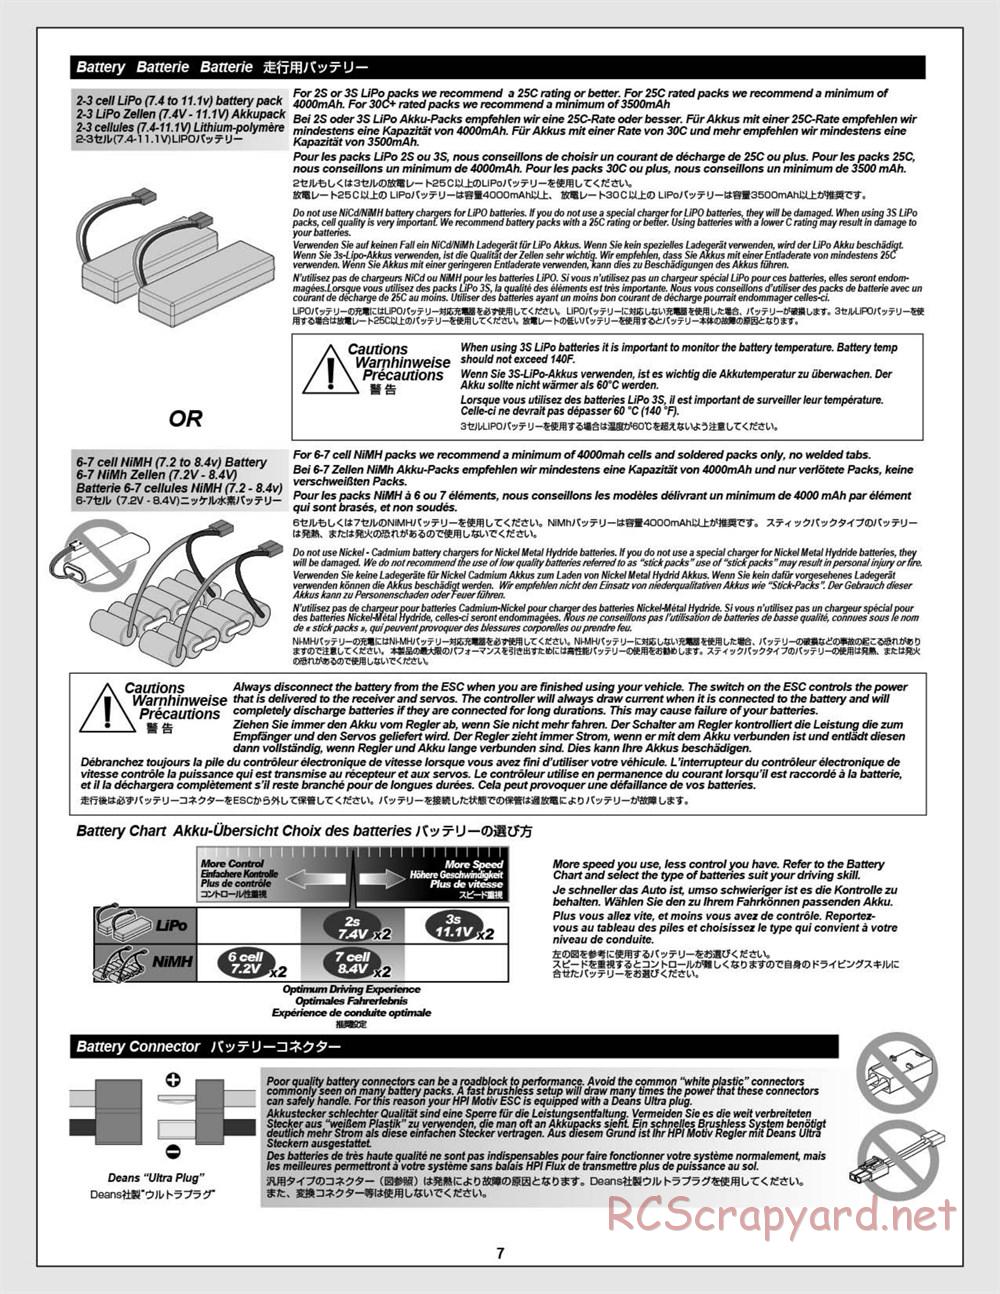 HPI - Savage Flux HP - Manual - Page 7